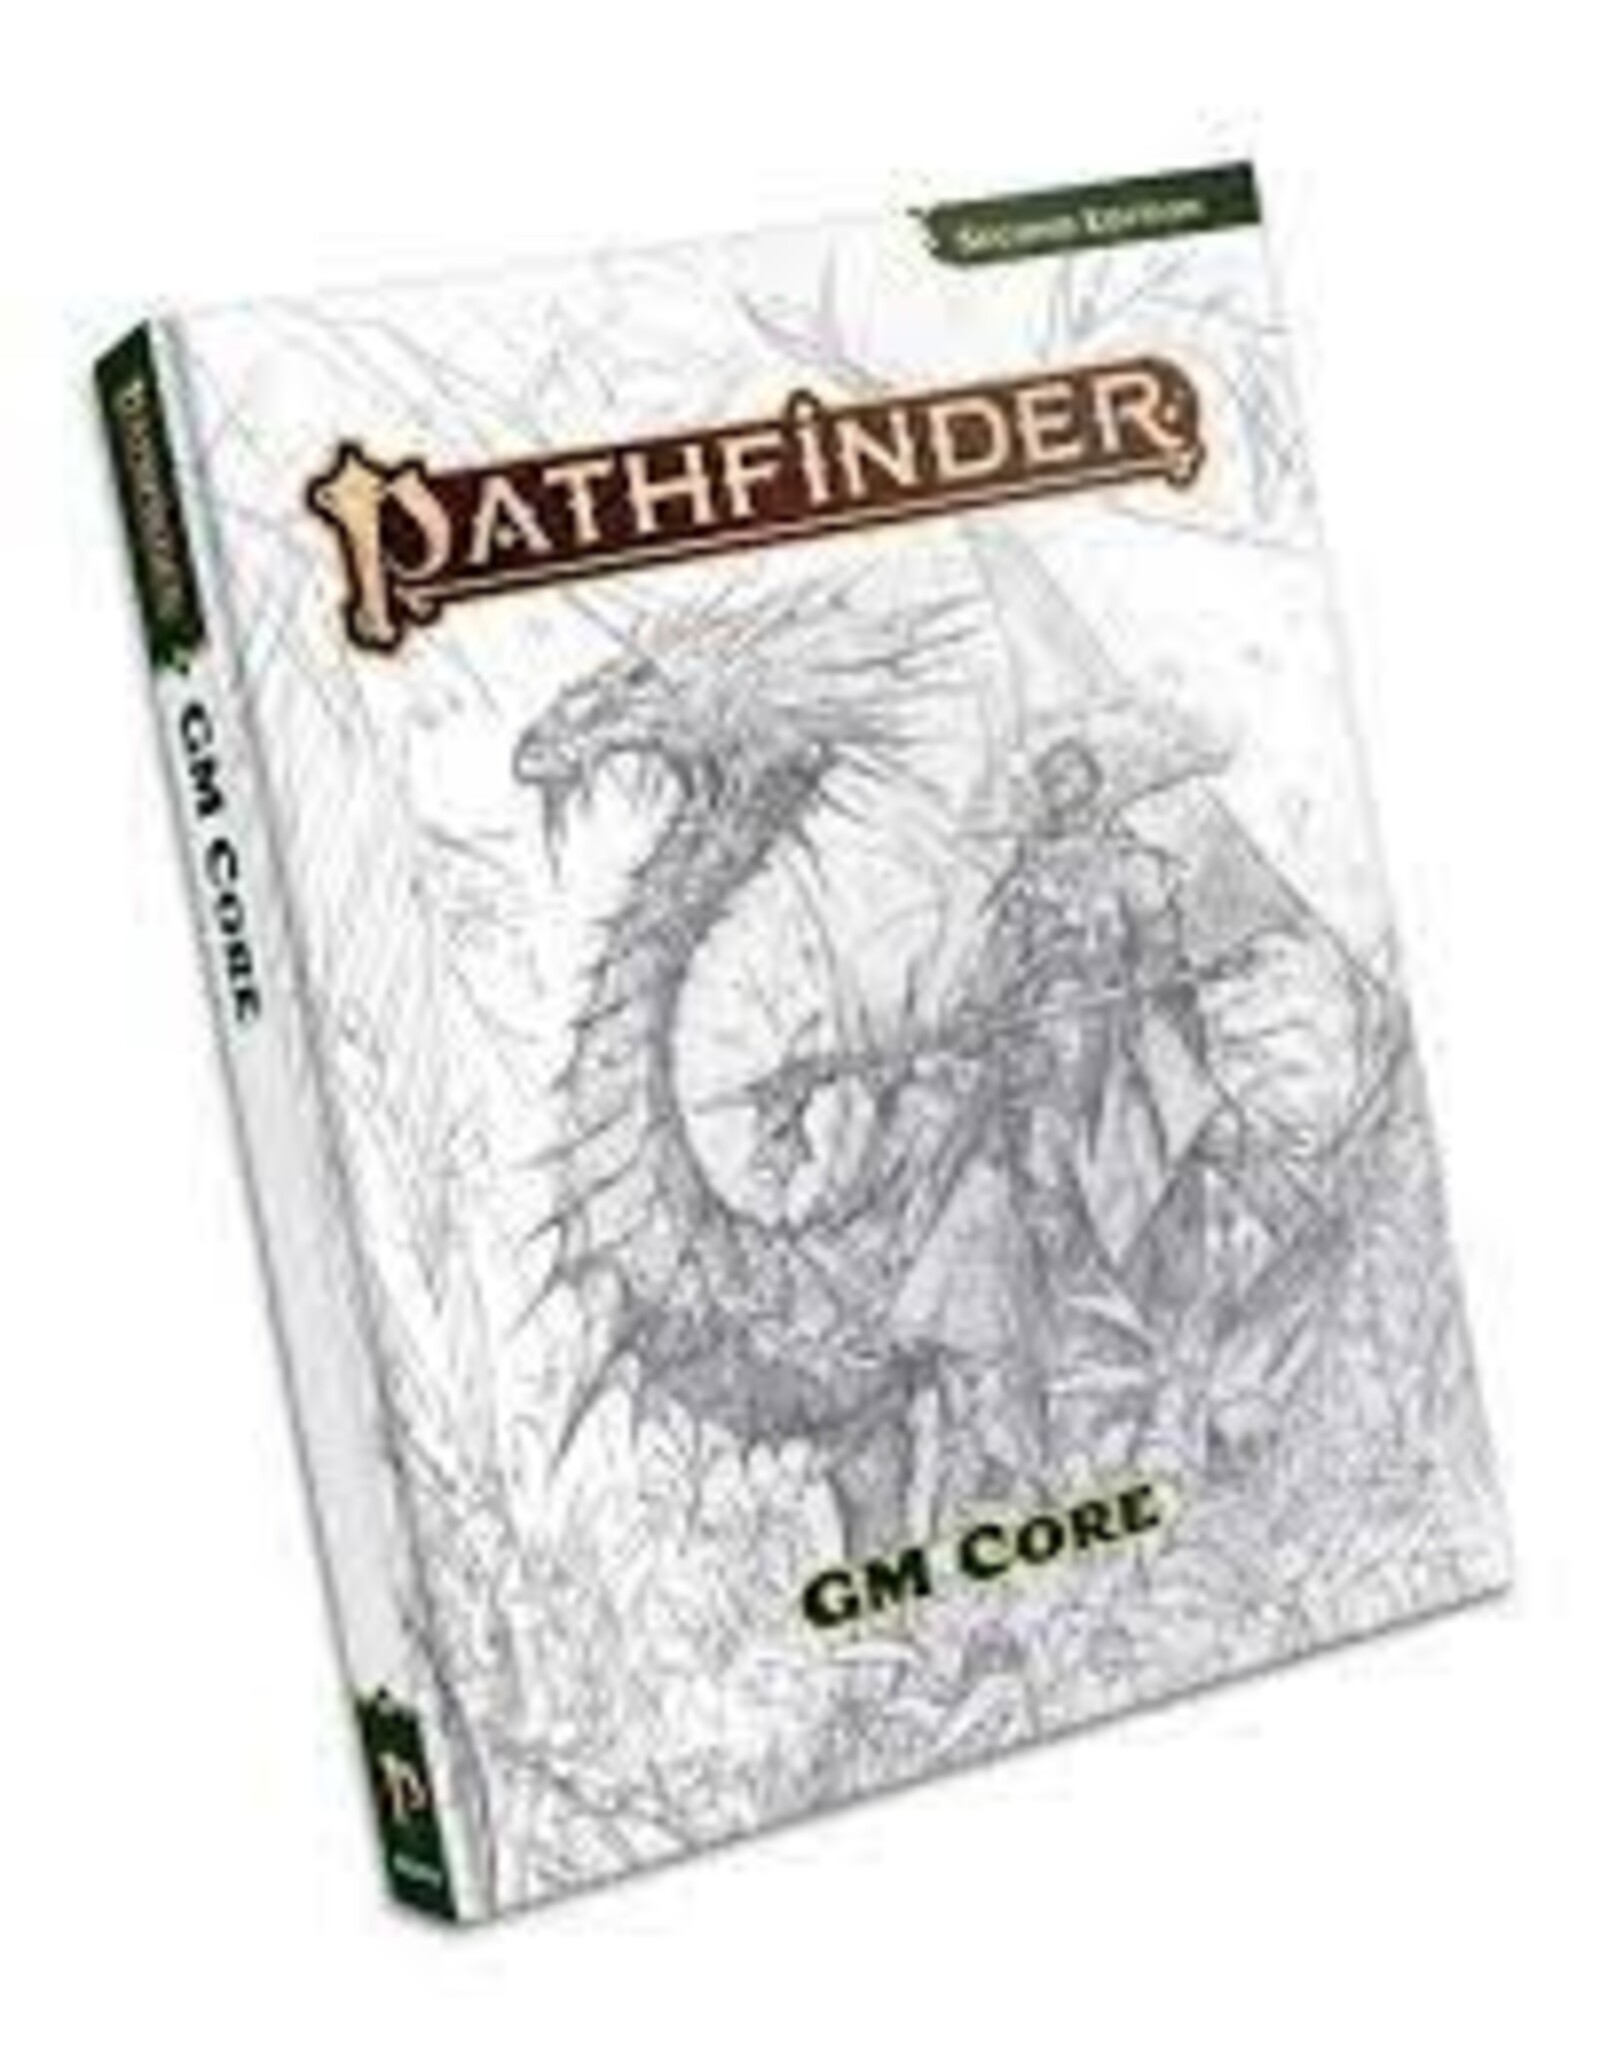 Pathfinder: GM Core, Sketch Cover